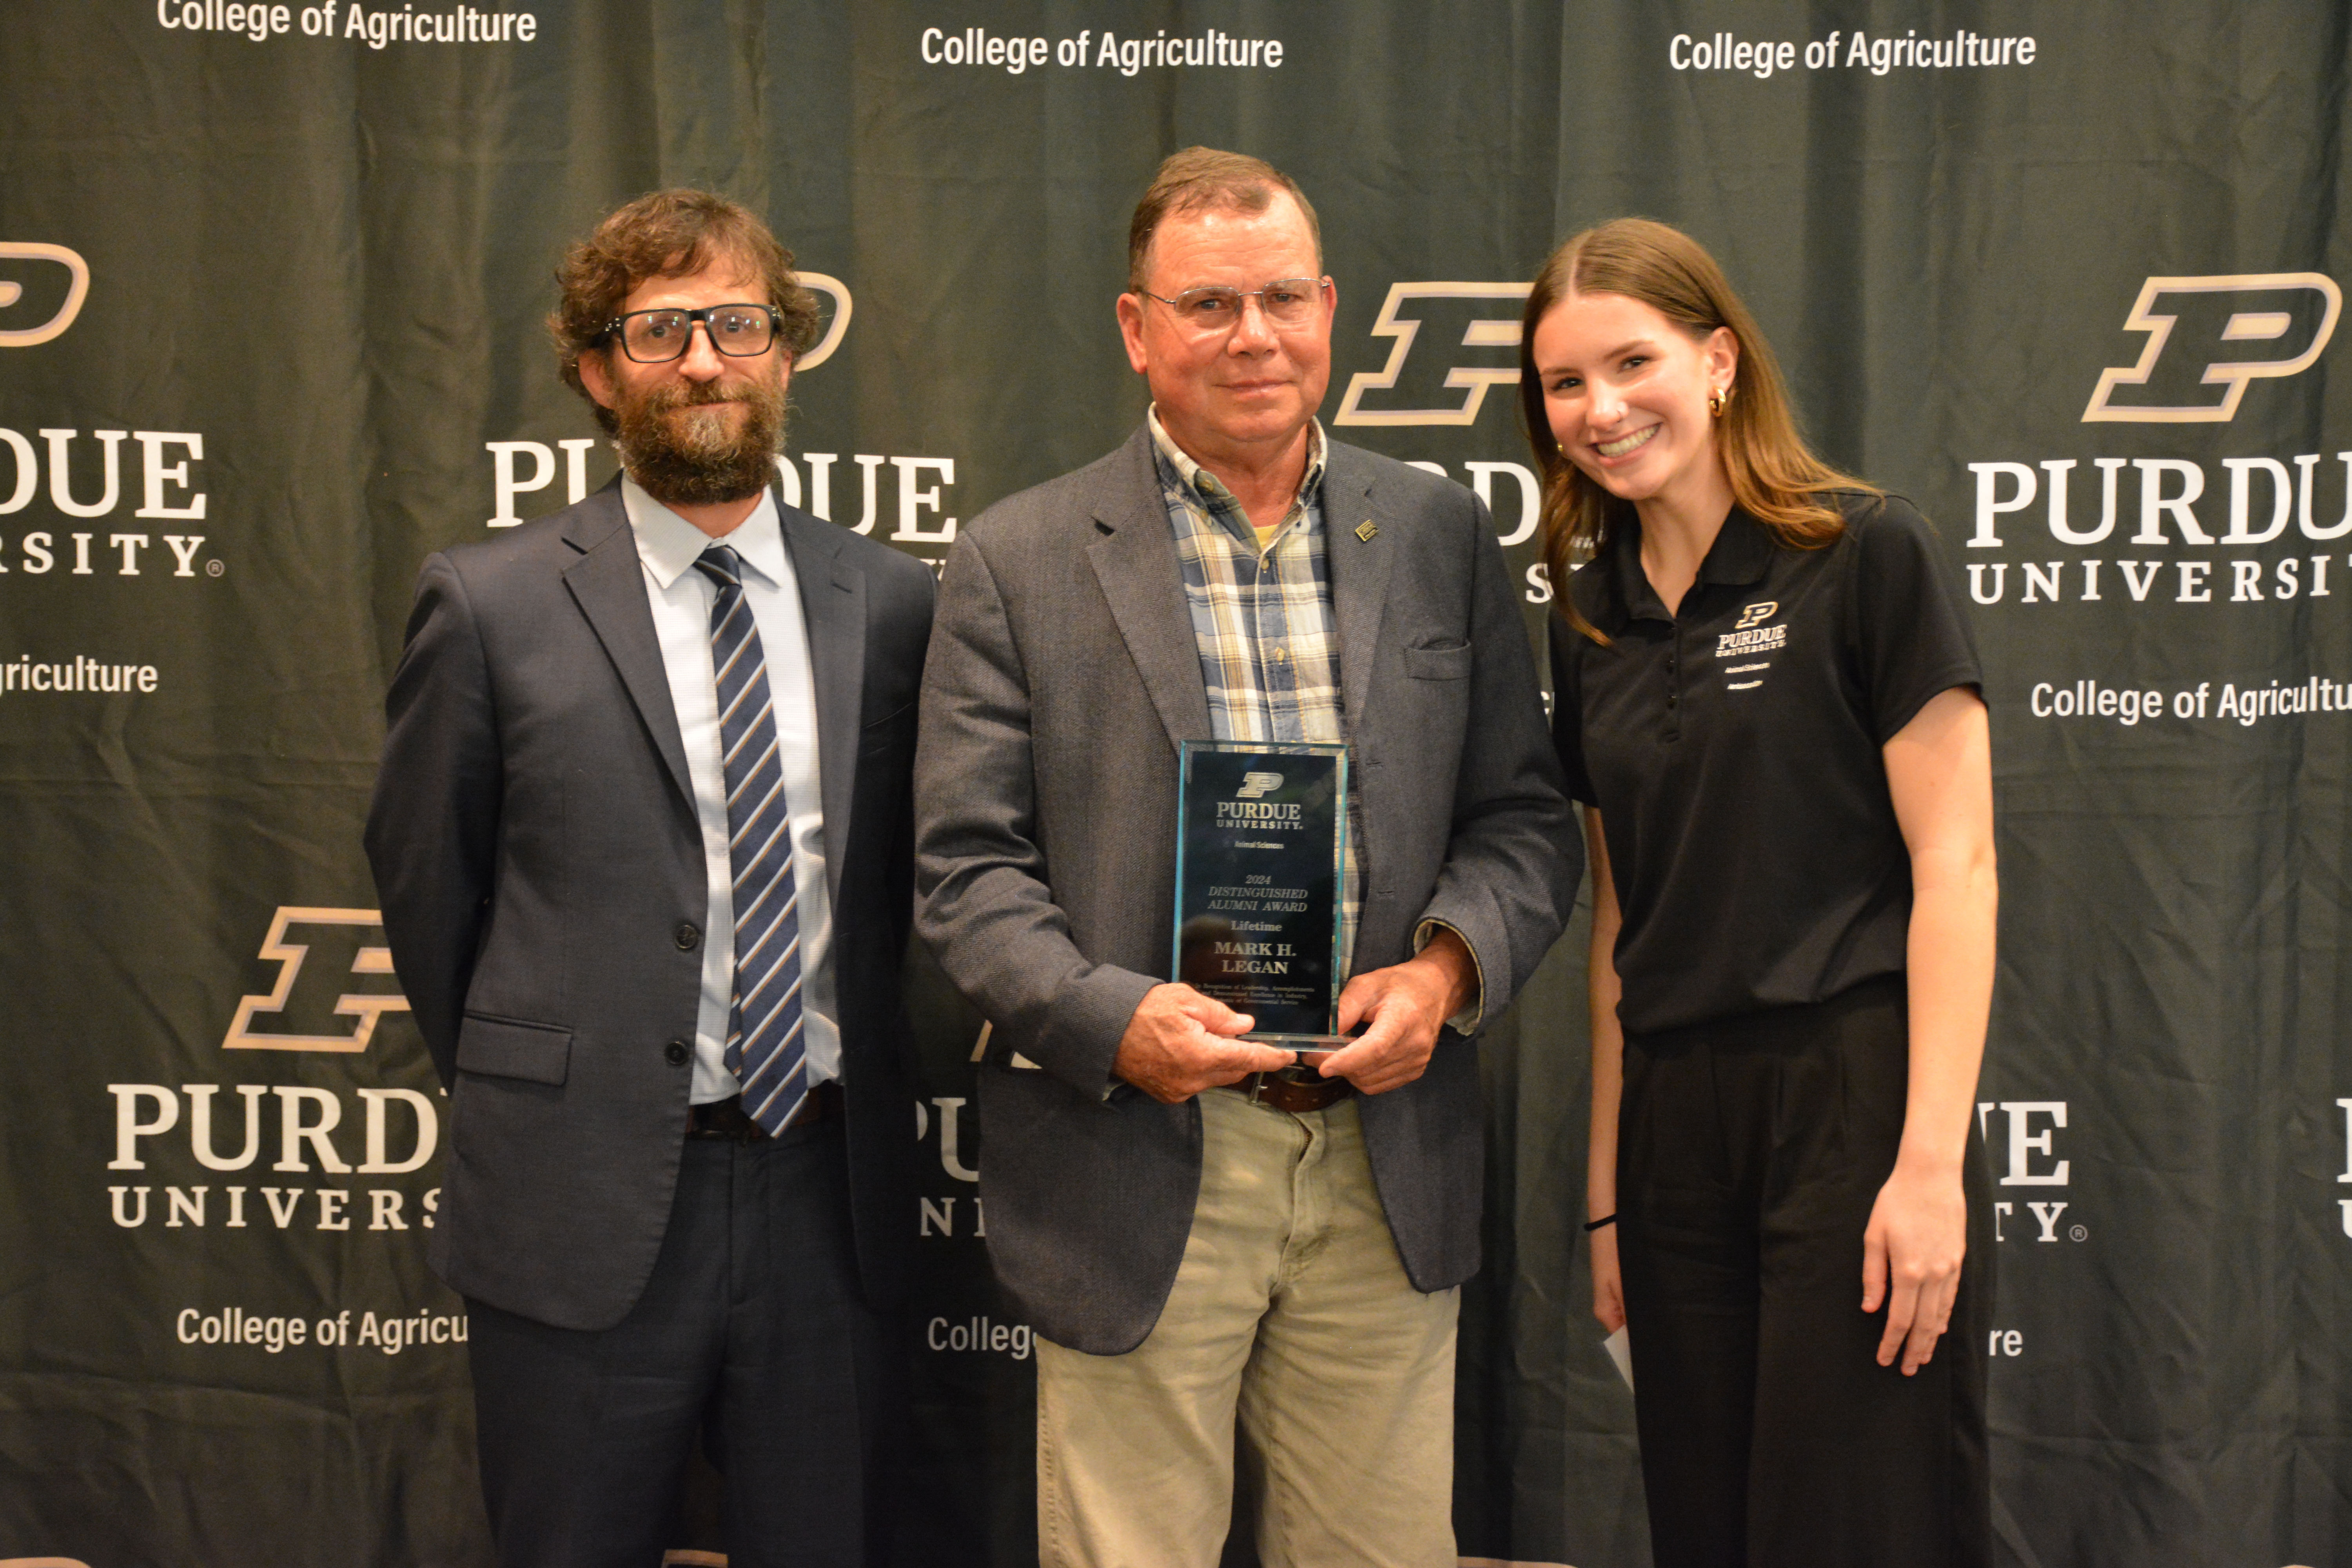 Mark Legan accepting his award. Dr. Paul Ebner and Hadley James stand next to him.